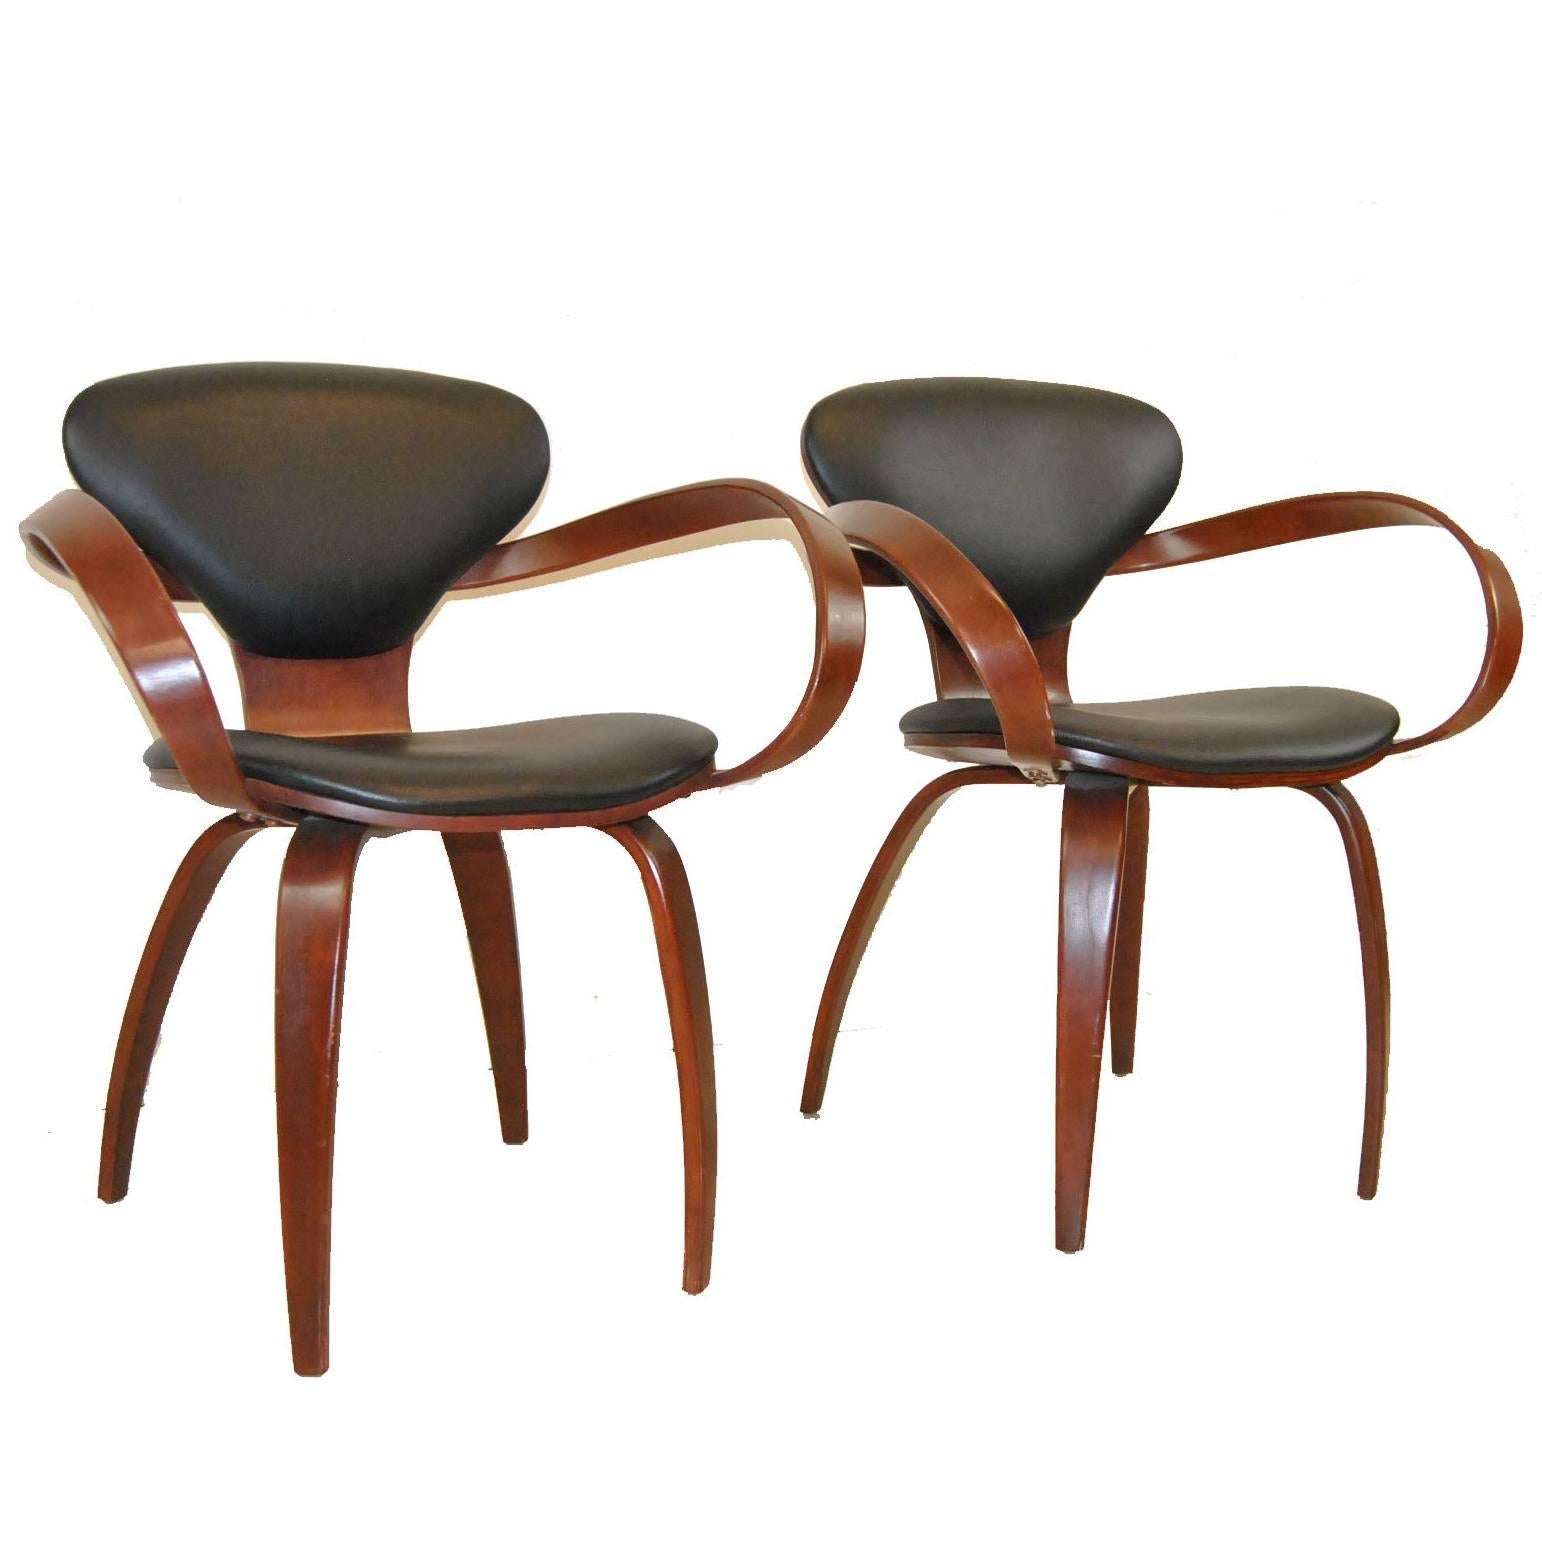 Pair of Mid-Century Modern "Levinger" Chairs by Goldman Chair, Pretzel Chair